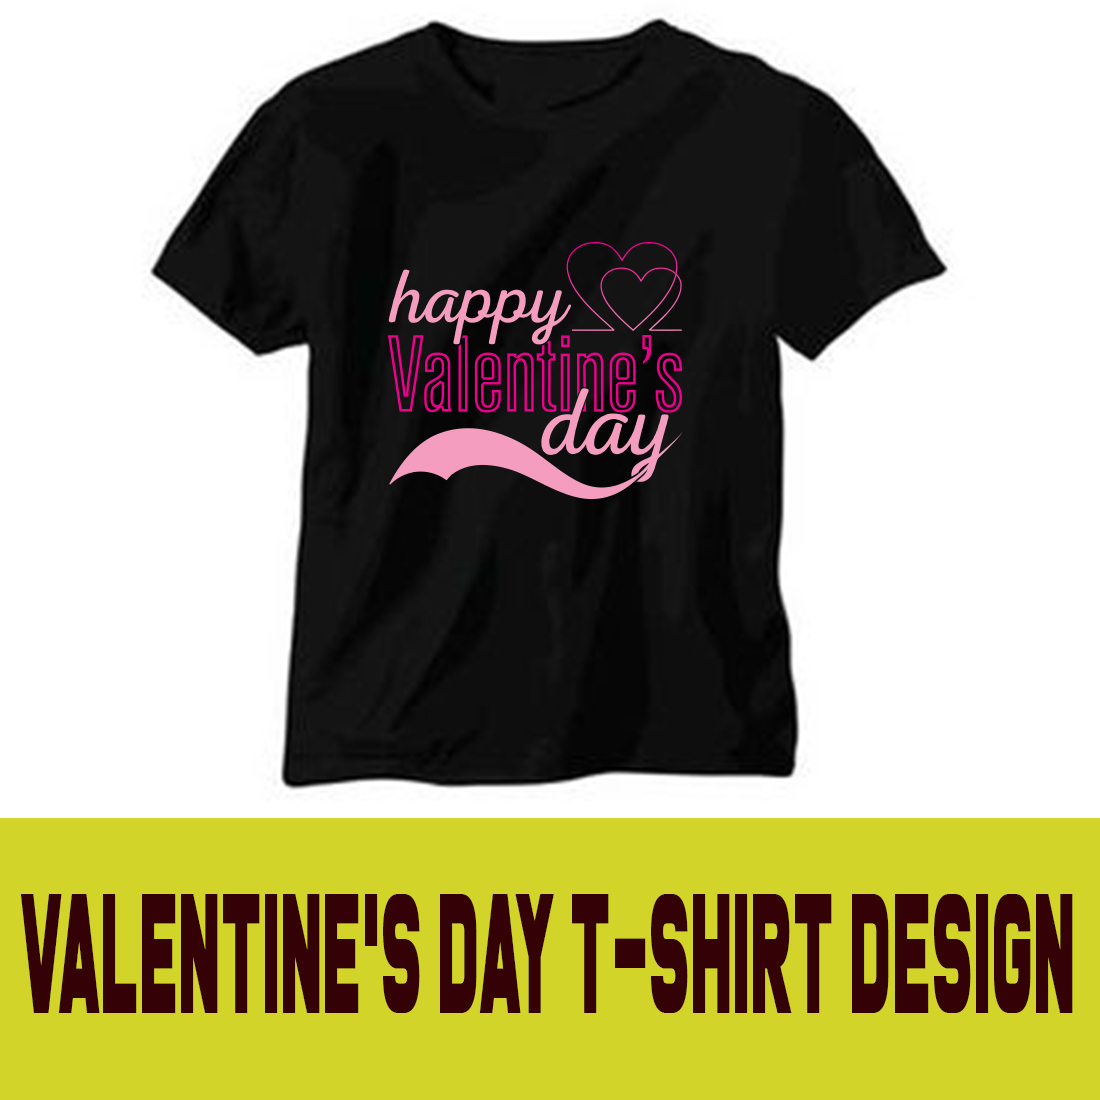 T-shirt image with amazing inscription happy valentines day